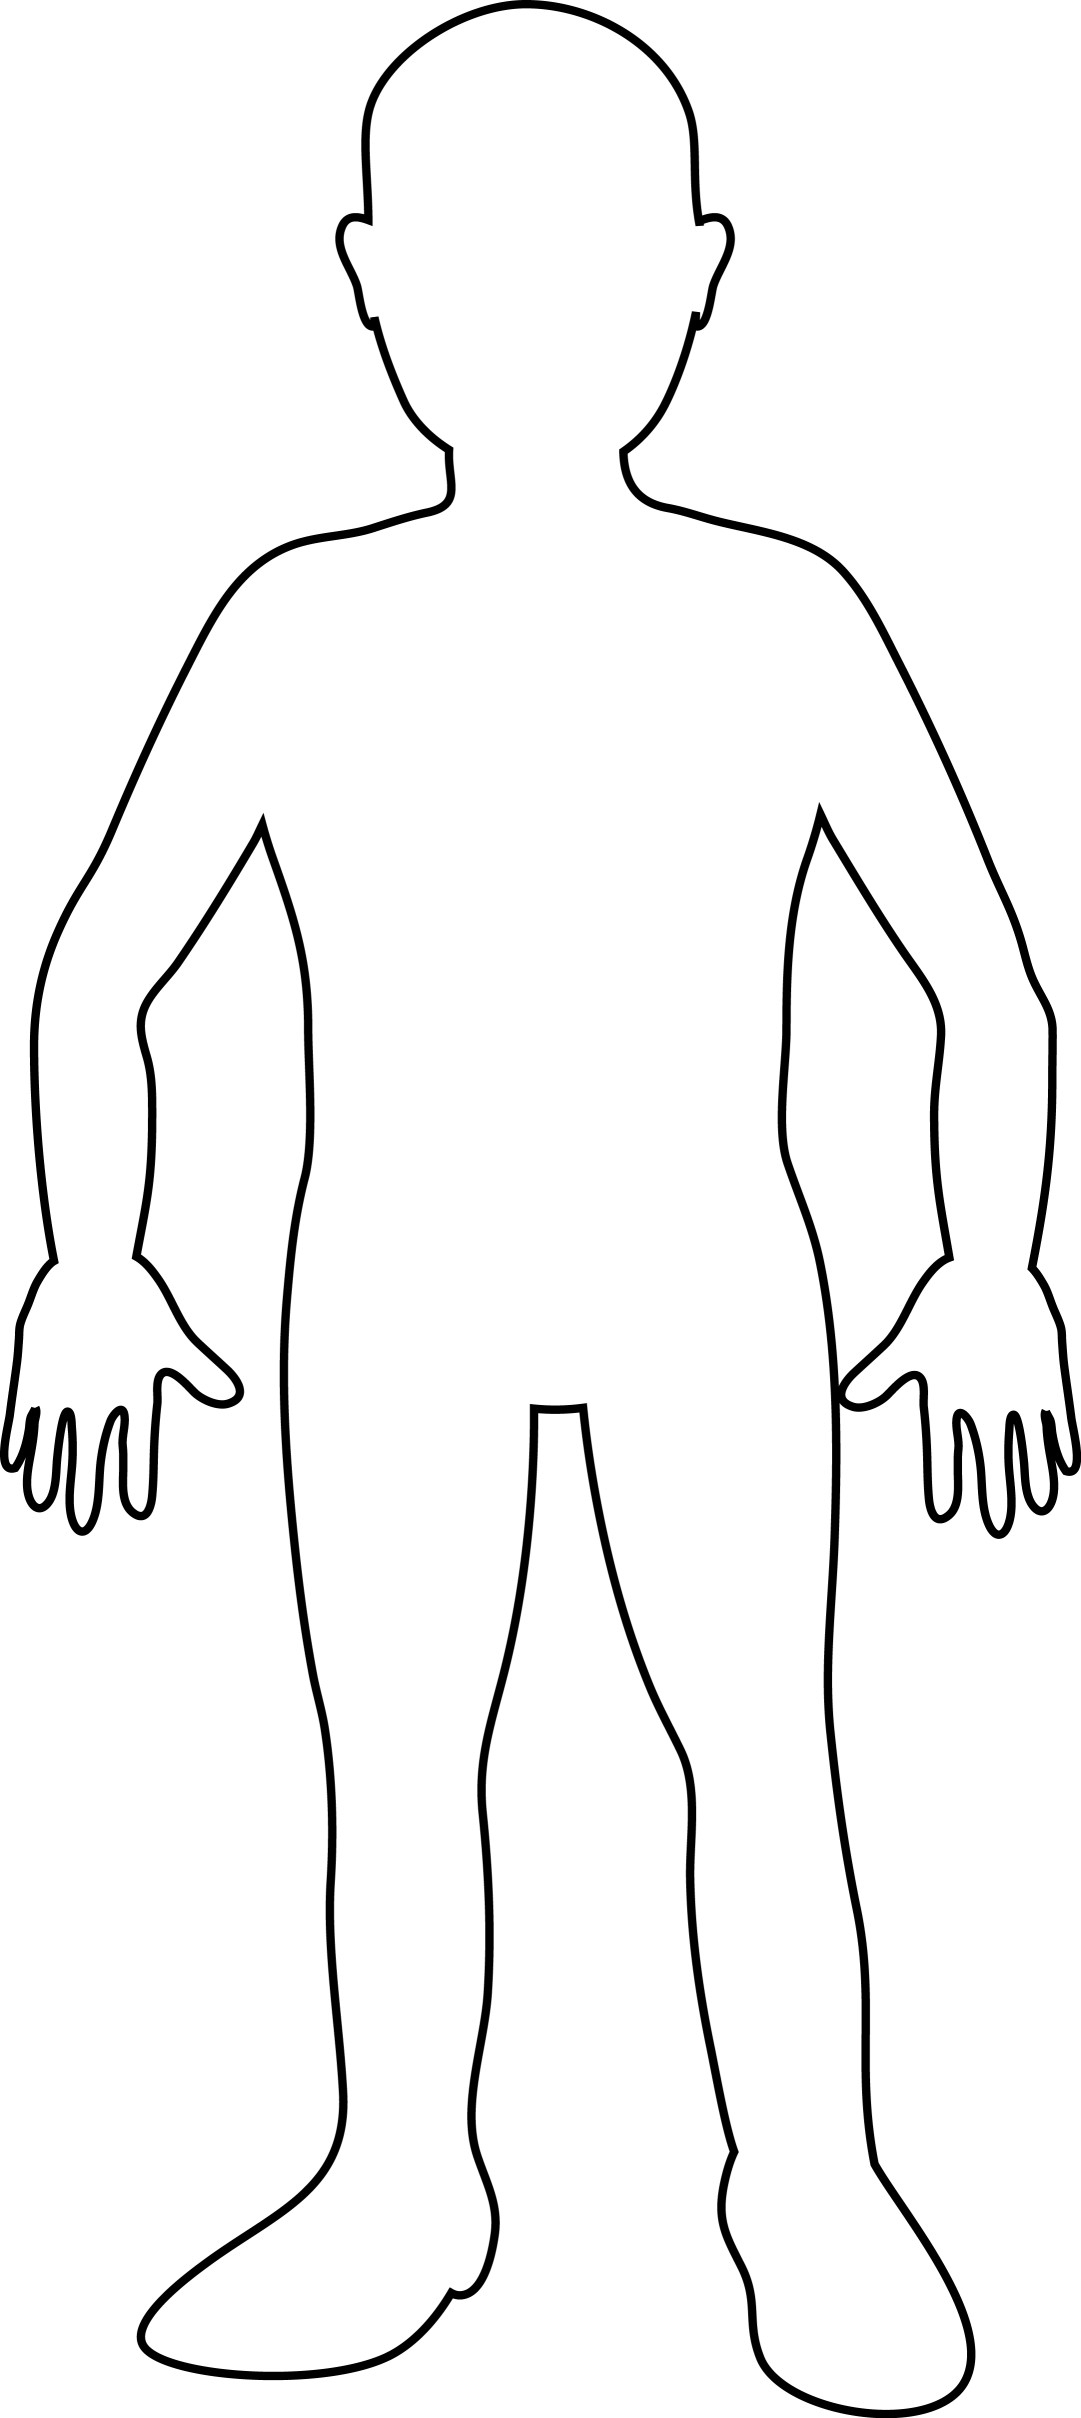 Free Blank Person Outline, Download Free Clip Art, Free Clip With Regard To Blank Body Map Template